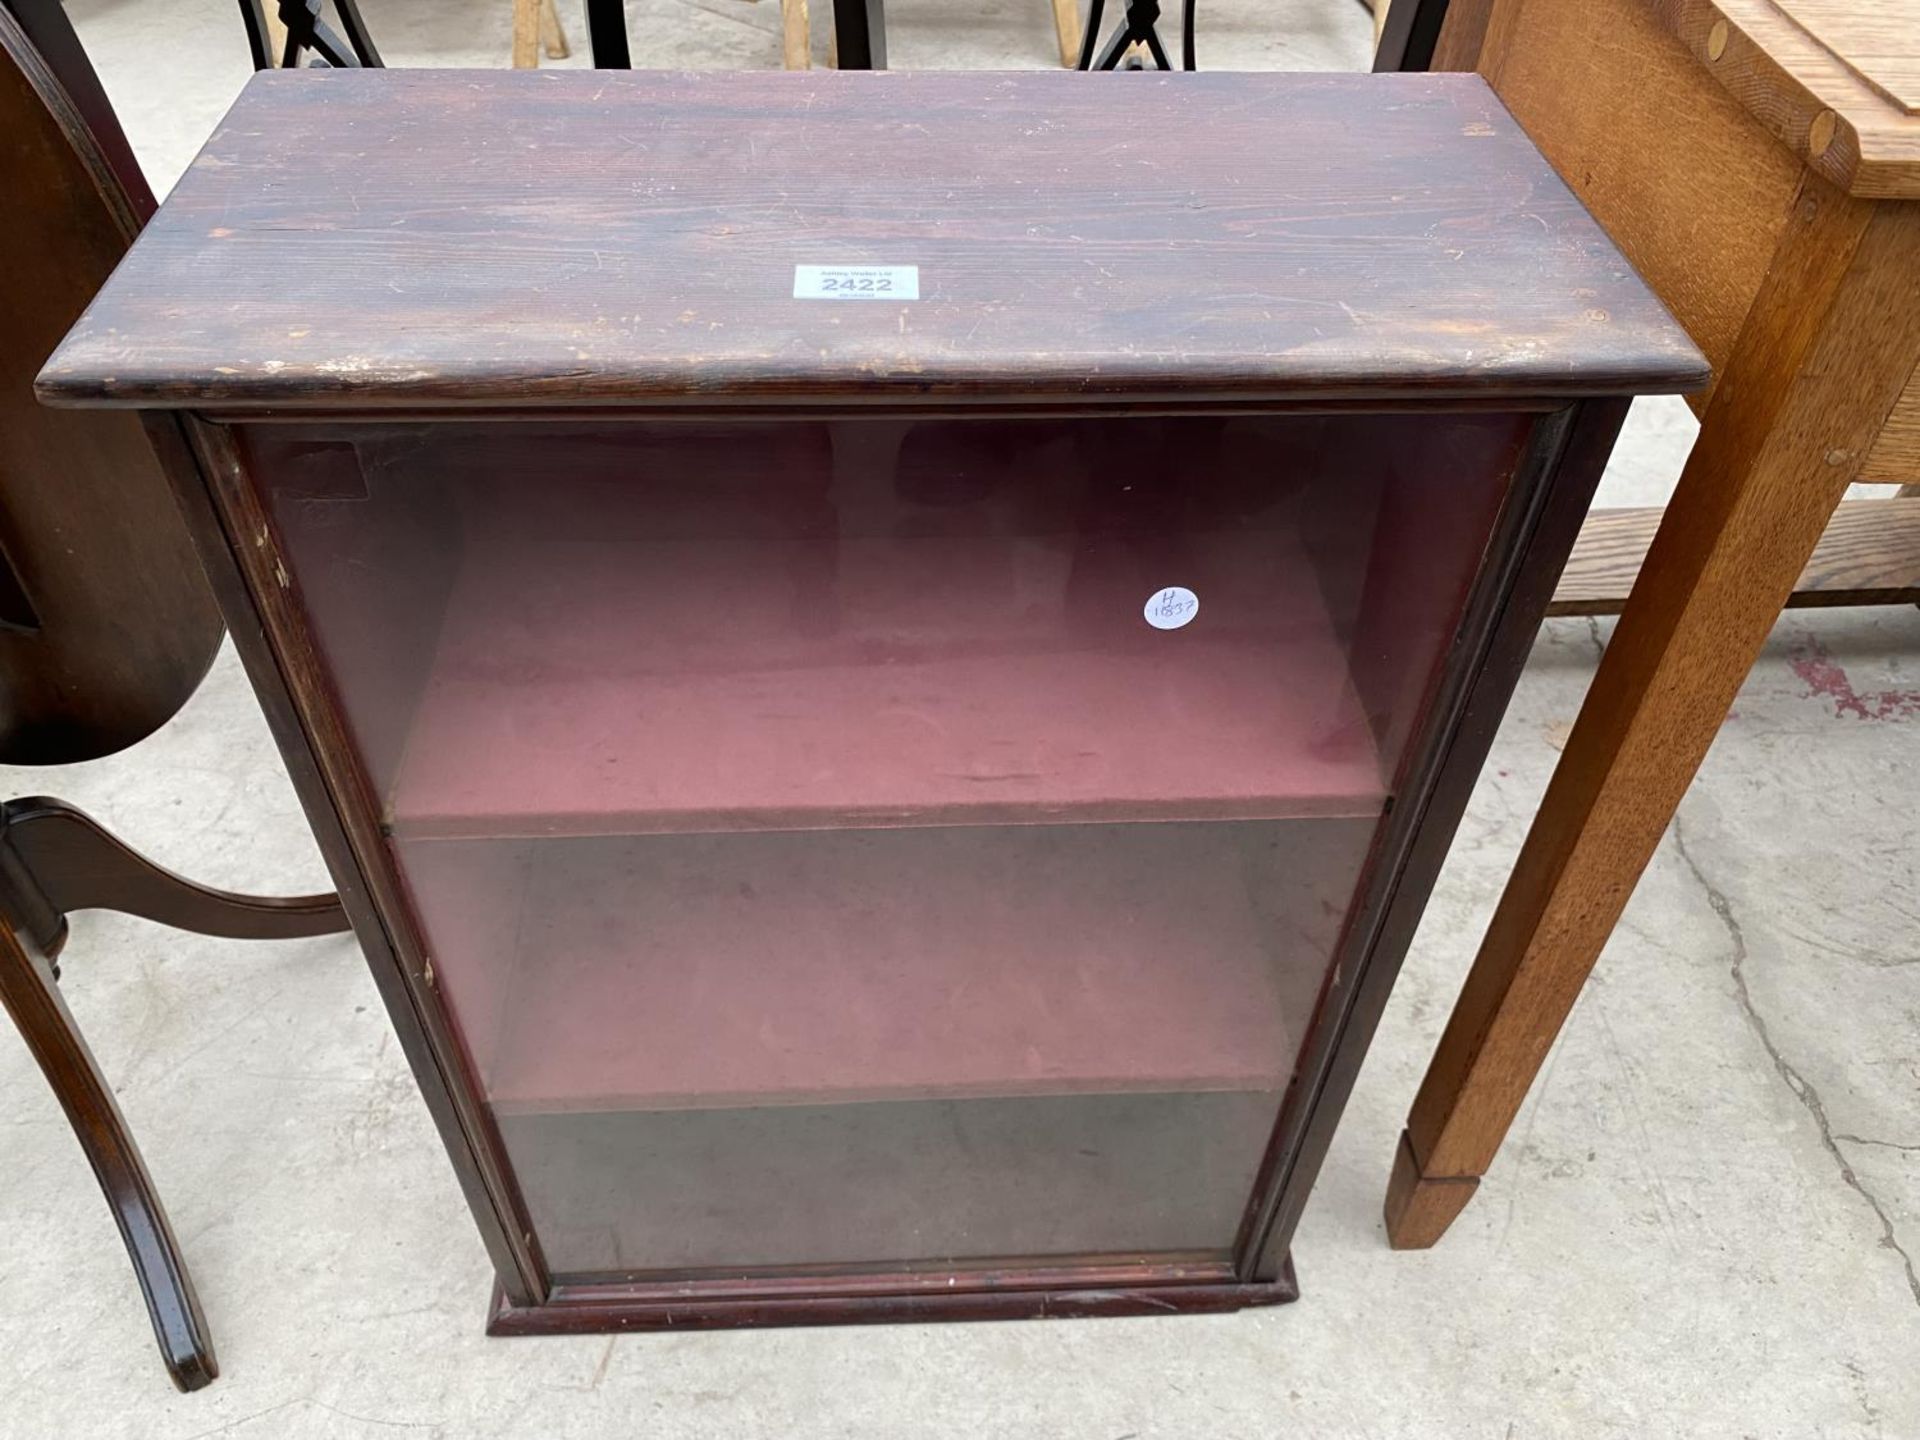 AN EDWARDIAN GLASS FRONTED SHOP COUNTER DISPLAY CASE, 19" WIDE